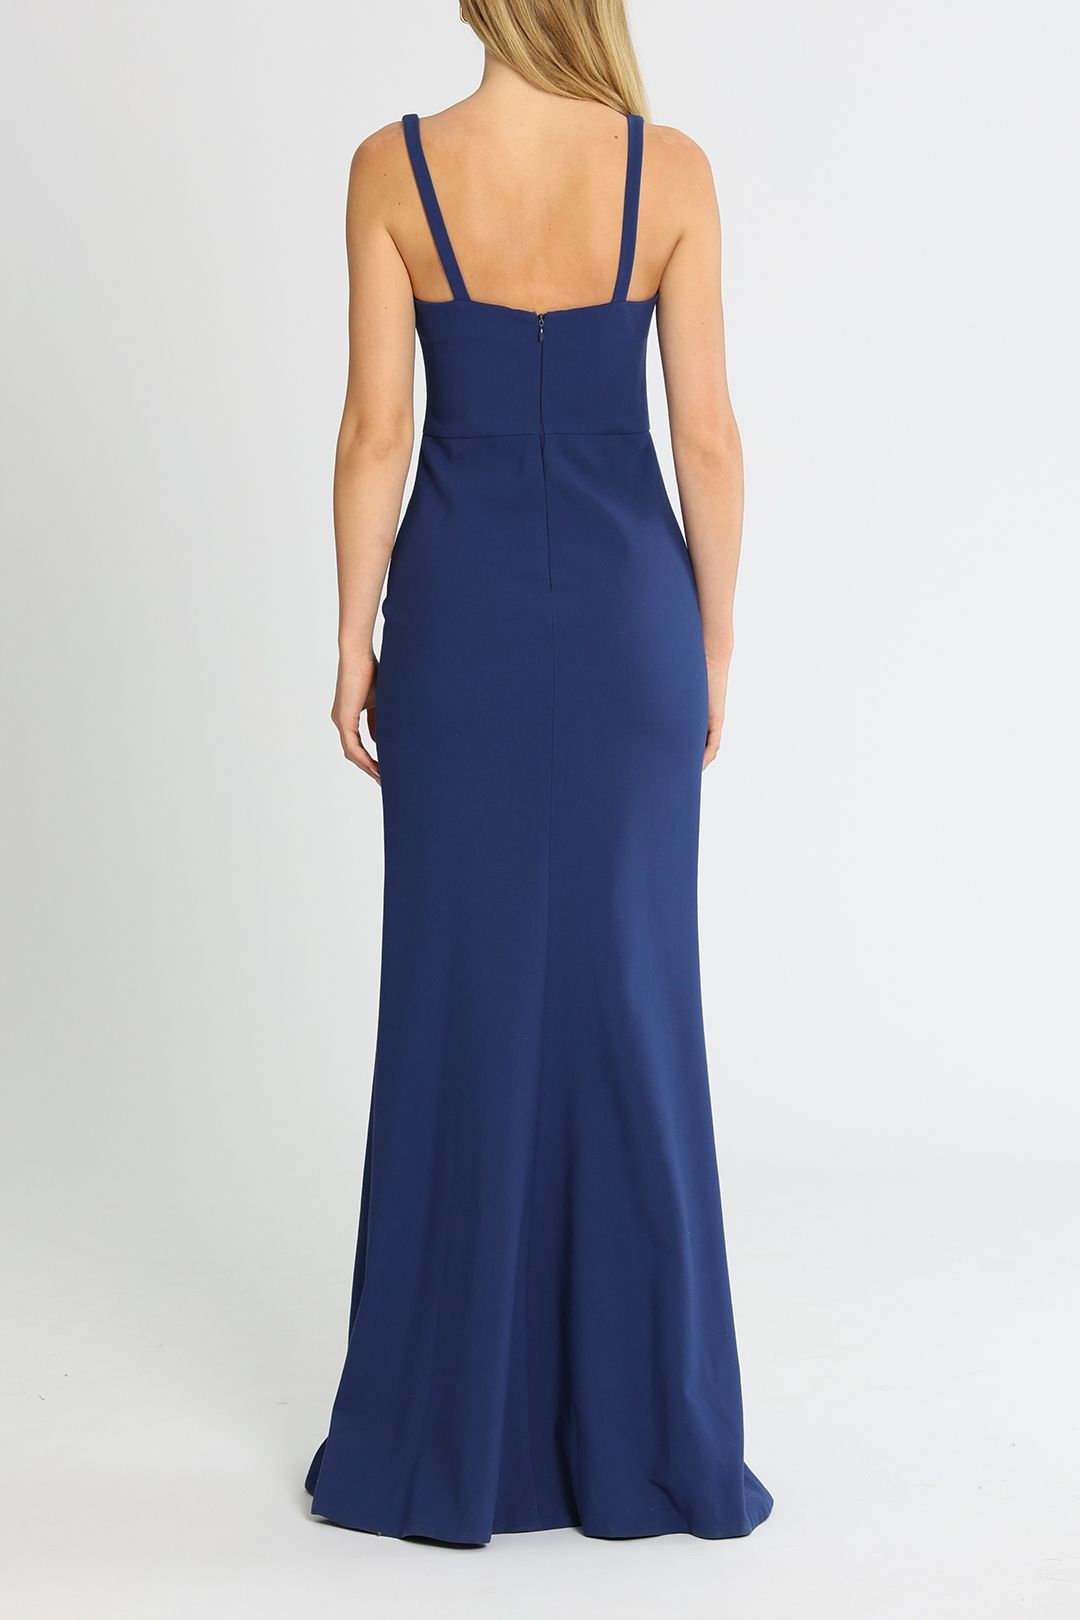 Likely NYC Constance Gown Navy Sleeveless